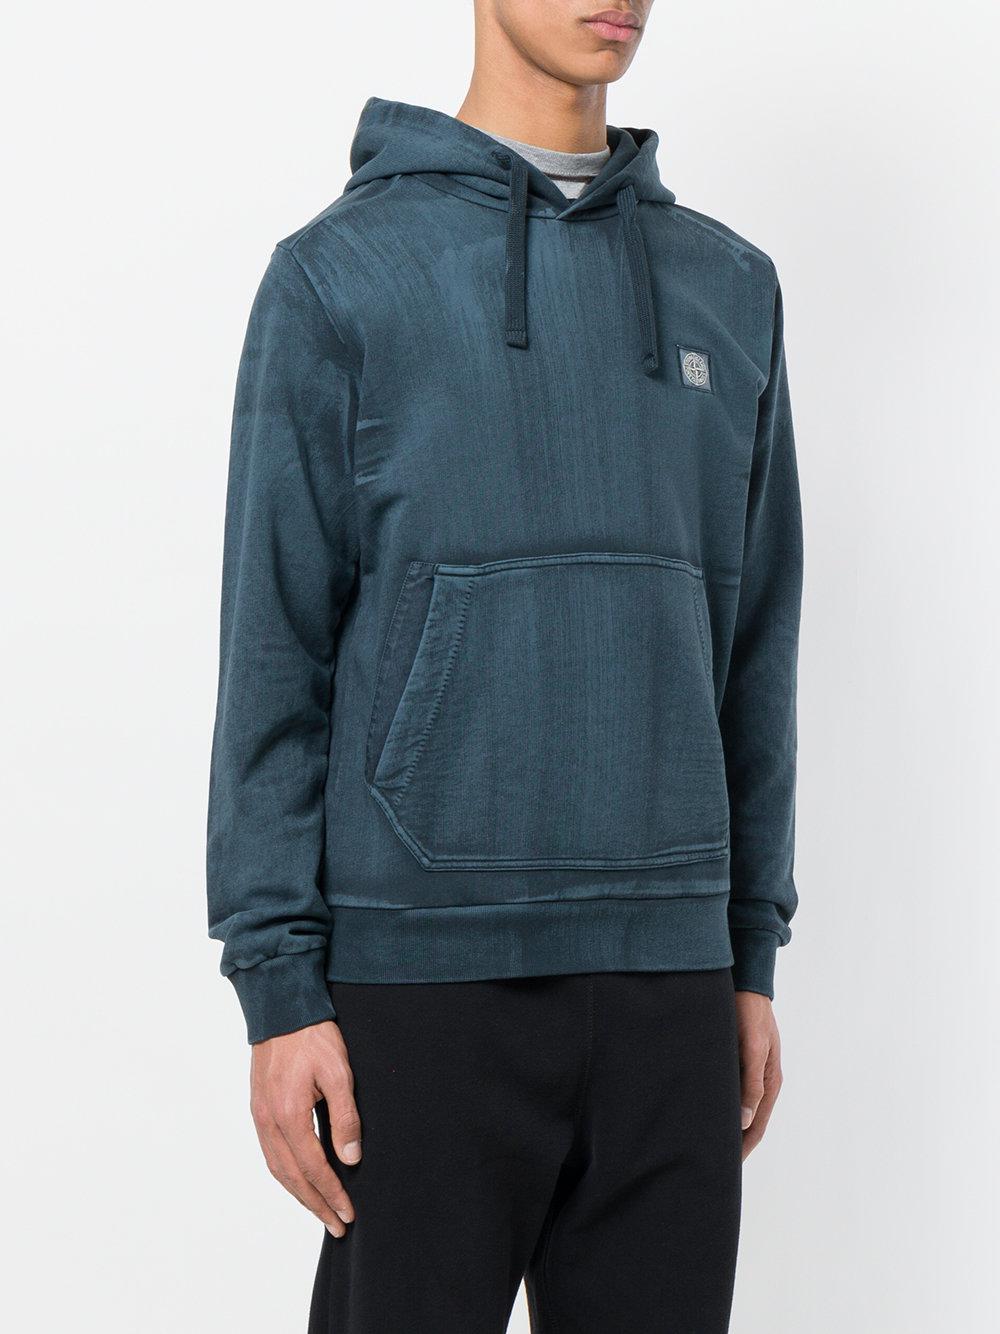 Stone Island Cotton Acid Wash Hoodie in Blue for Men - Lyst